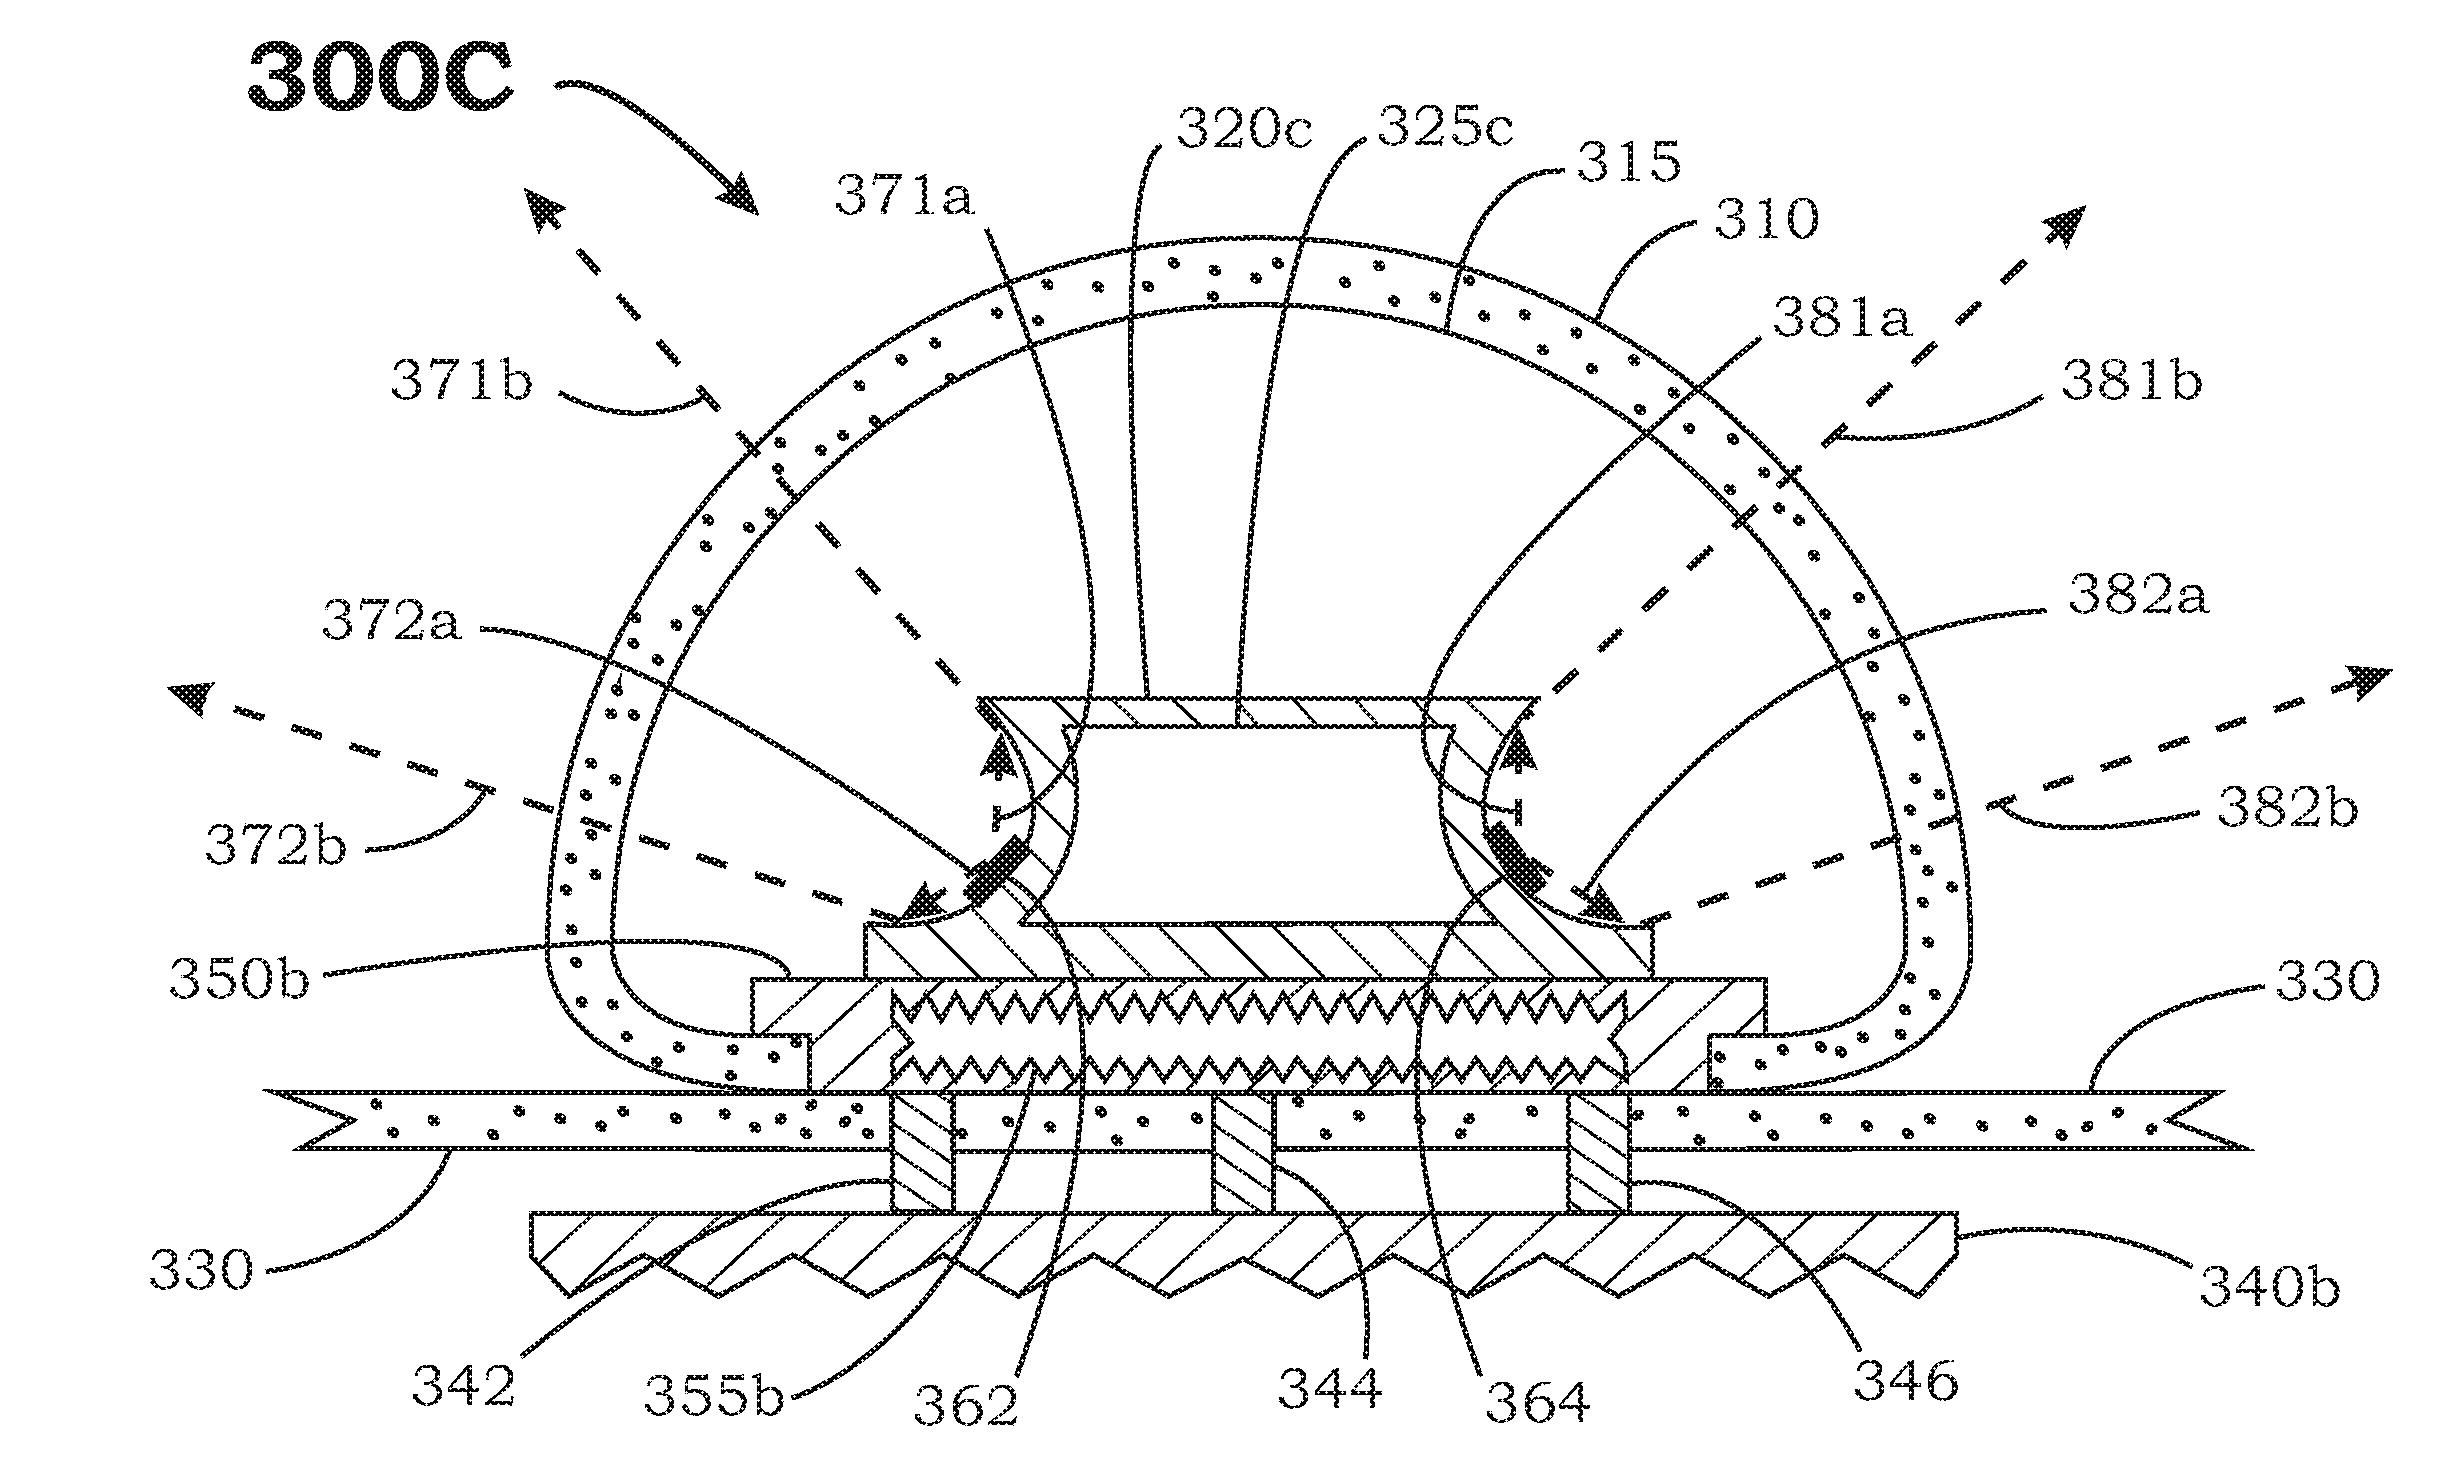 Light emitting diode assemblies for illuminating refrigerated areas